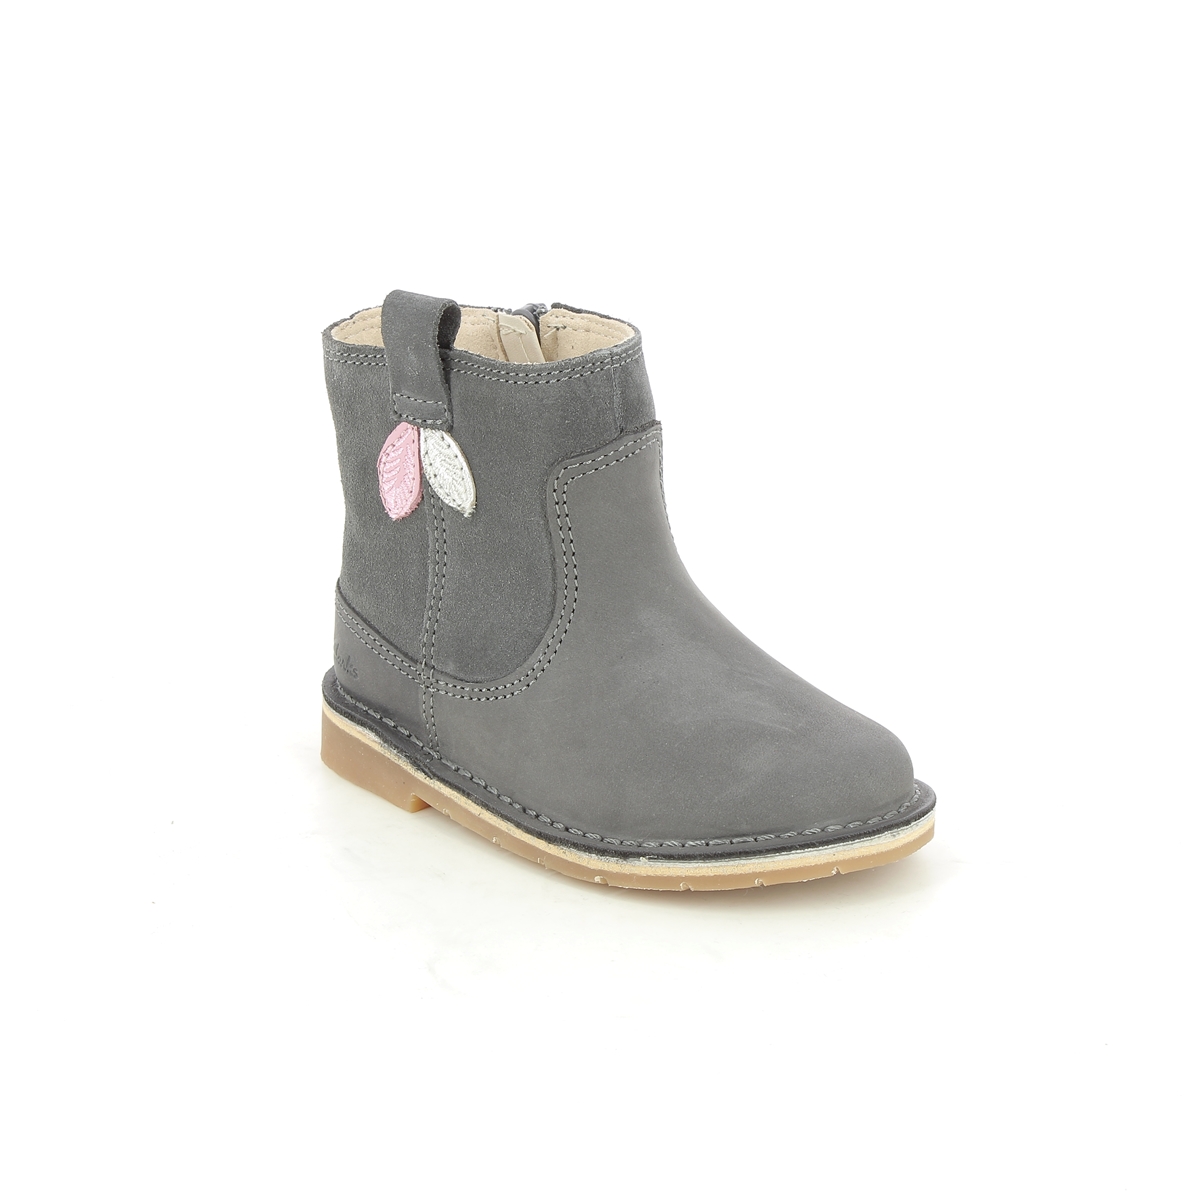 Clarks Comet Style T Grey Leather Kids Toddler Girls Boots 619426F In Size 5.5 In Plain Grey Leather F Width Fitting Regular Fit For kids